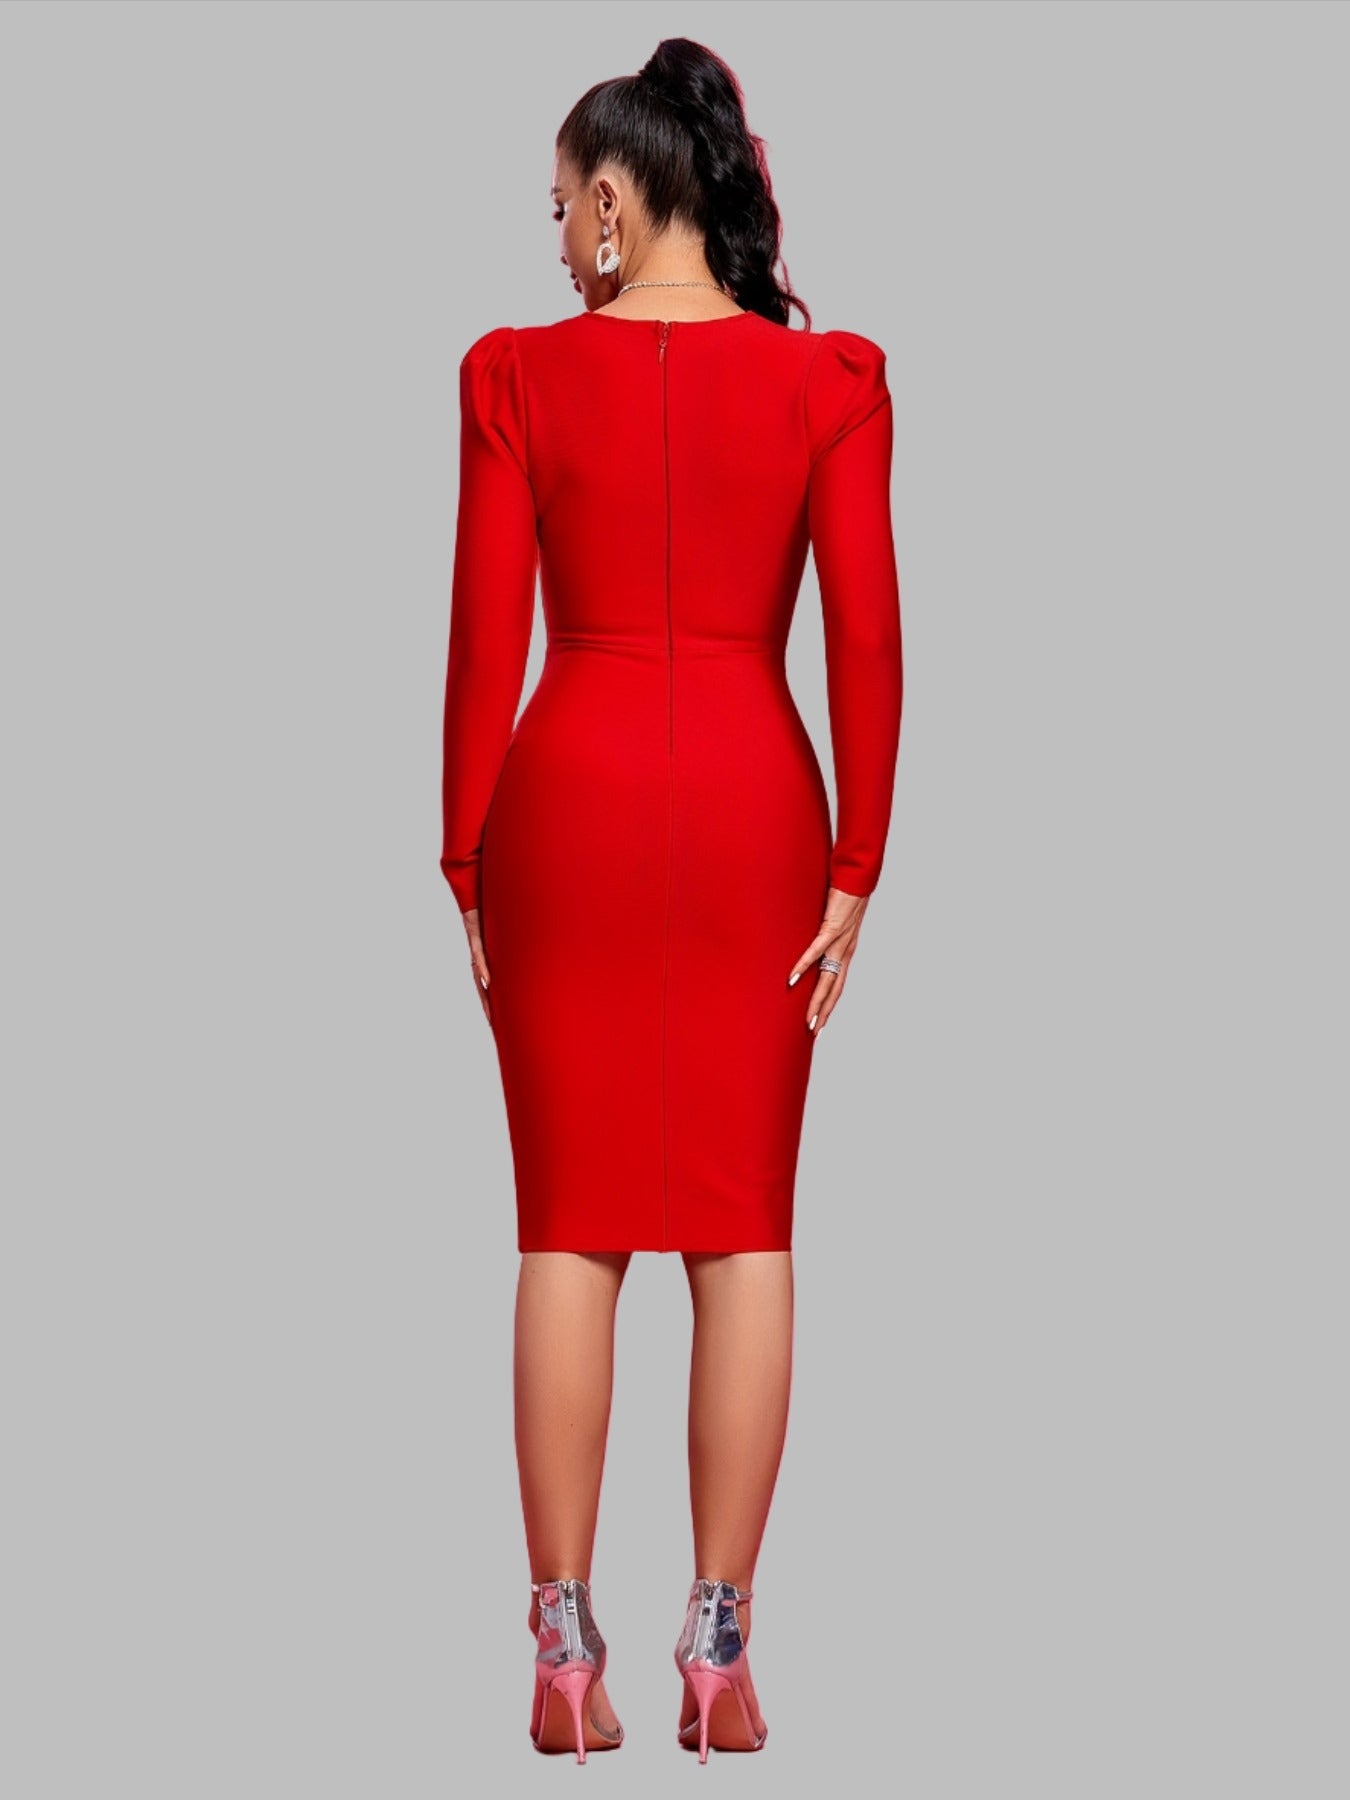 LLstyle Cut Out V Neck Bodycon Dress